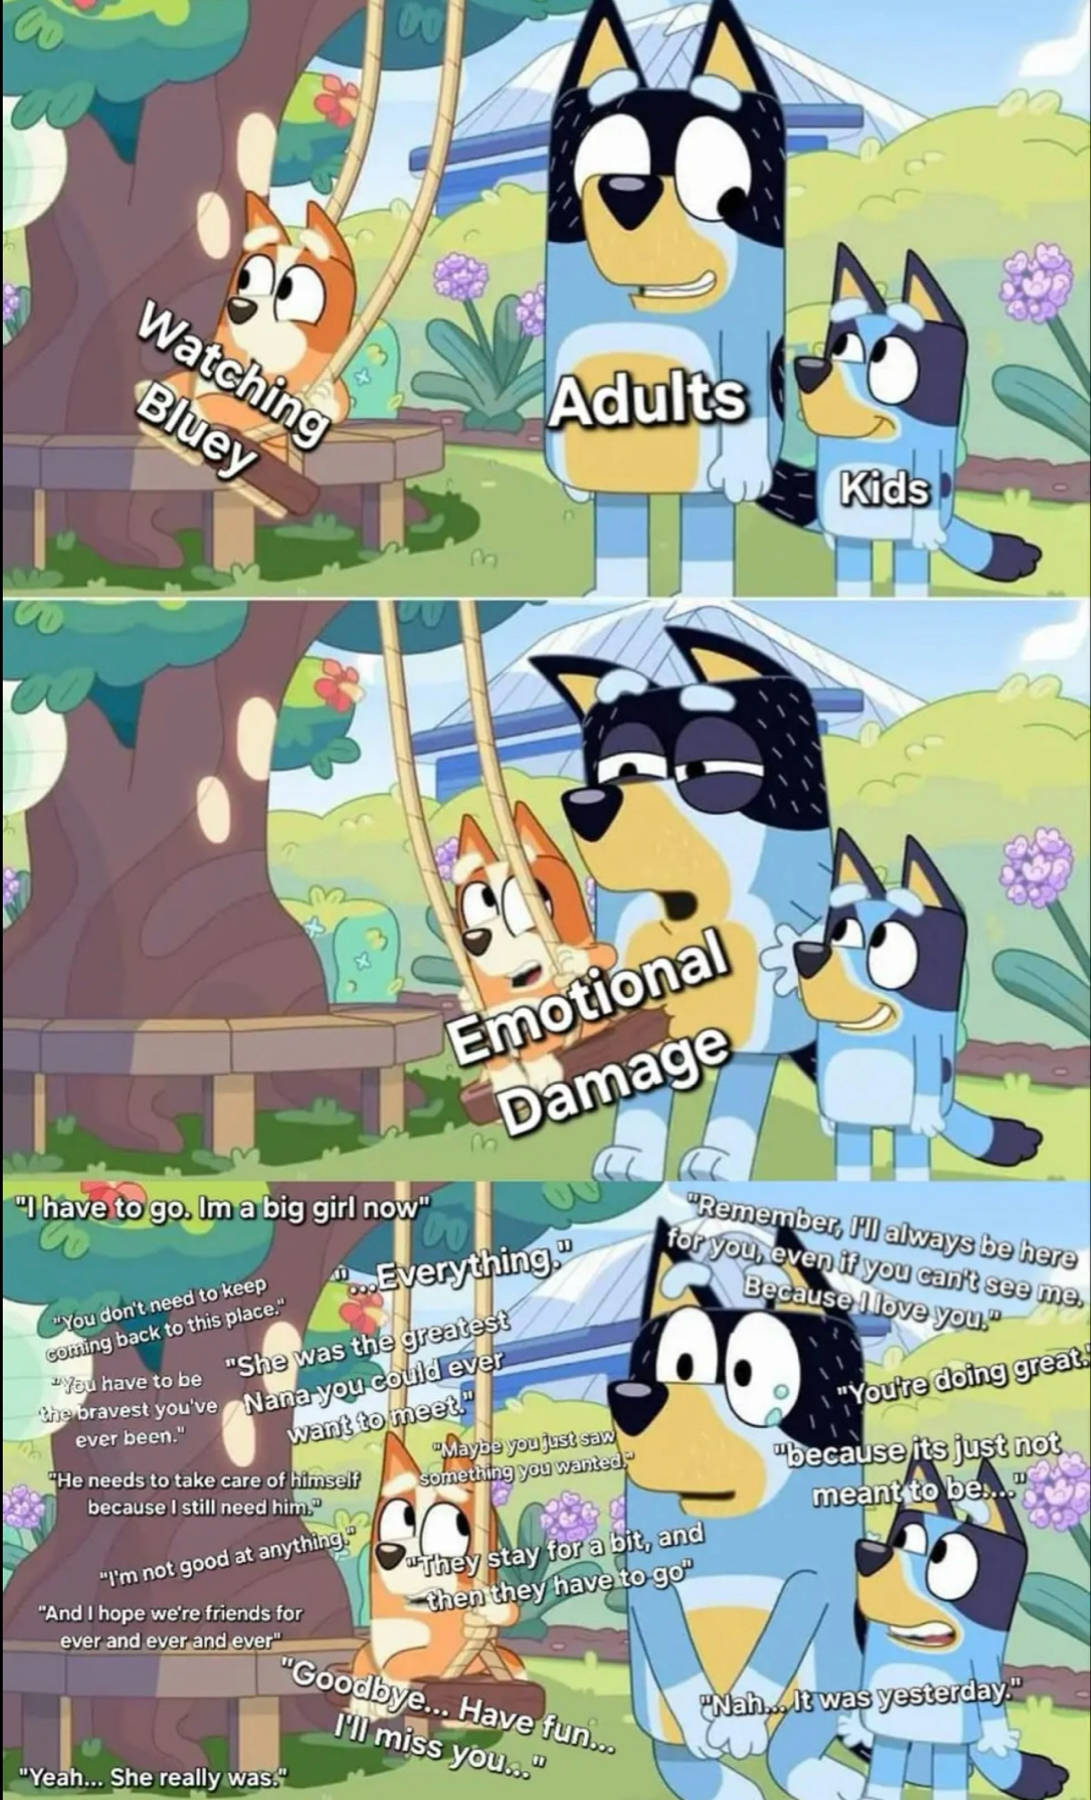 The image is a four-panel meme featuring characters from the animated TV show “Bluey,” superimposed with text to convey a thematic joke. In the first panel, a fox character sits on a swing with the text “Watching Bluey.” In